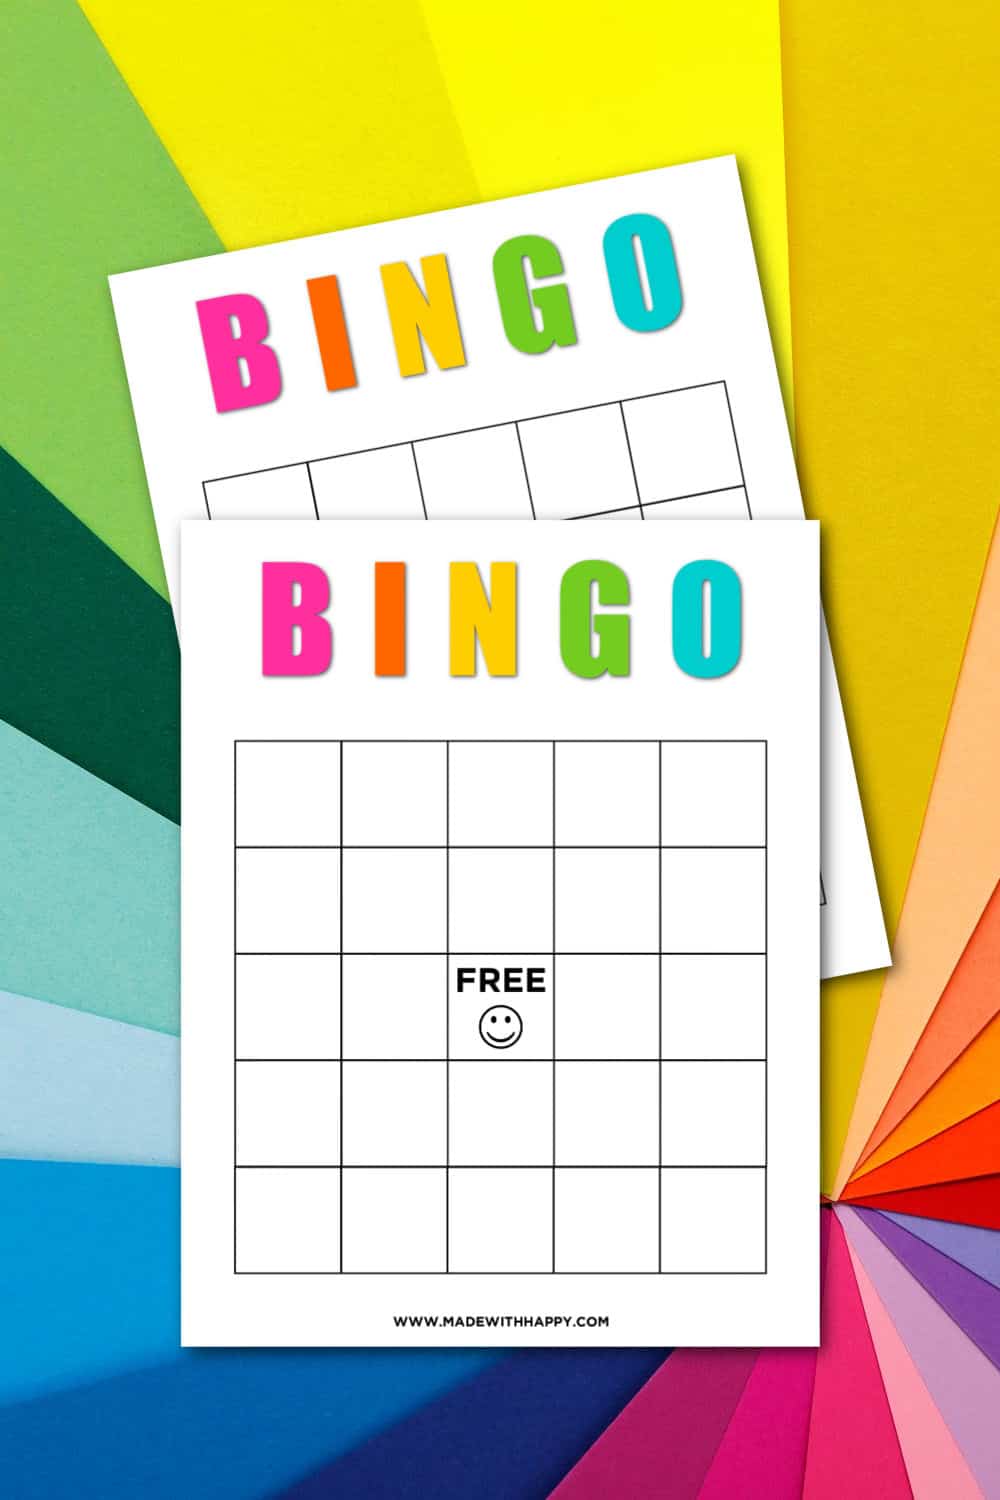 21+ Free Printable Bingo Cards - Made with HAPPY